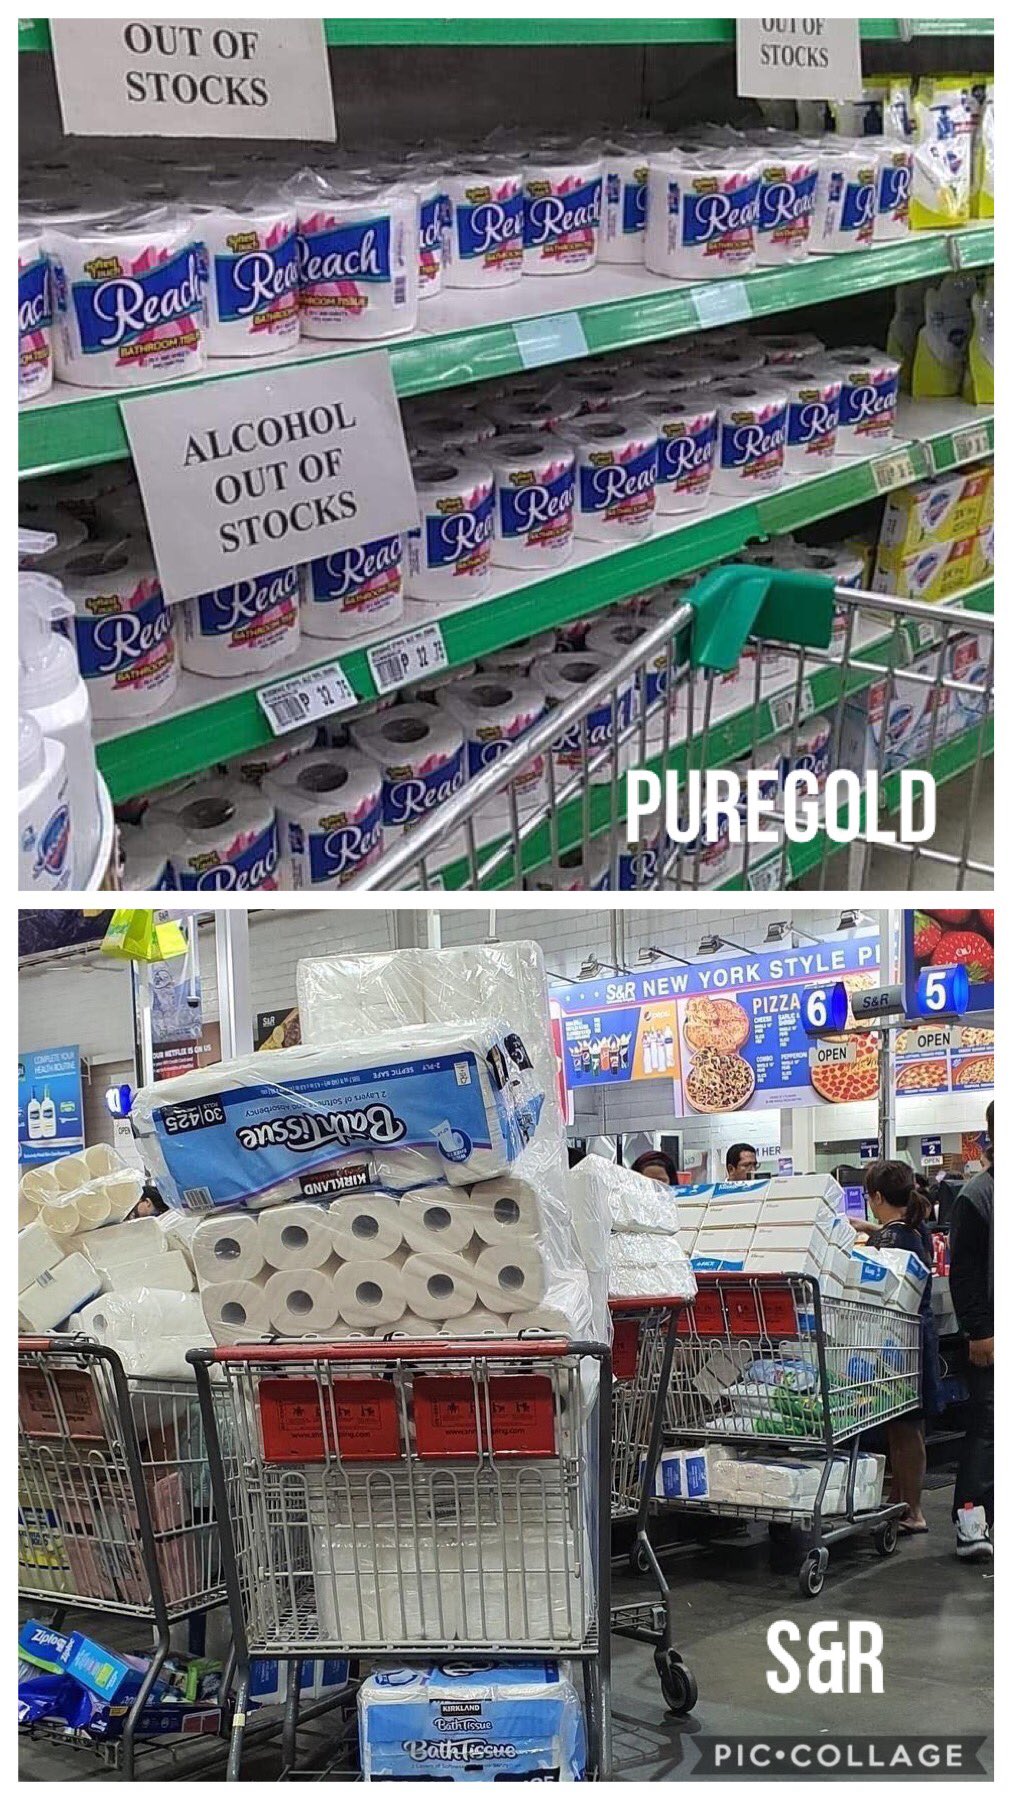 Ruffy Biazon On Twitter Interesting Study Here Puregold Shoppers Went For Alcohol And Left The Toilet Paper S R Shoppers Carted Away The Toilet Paper Puregold Photo Courtesy Of Mike Timbol Https T Co Eoewxx7hdk